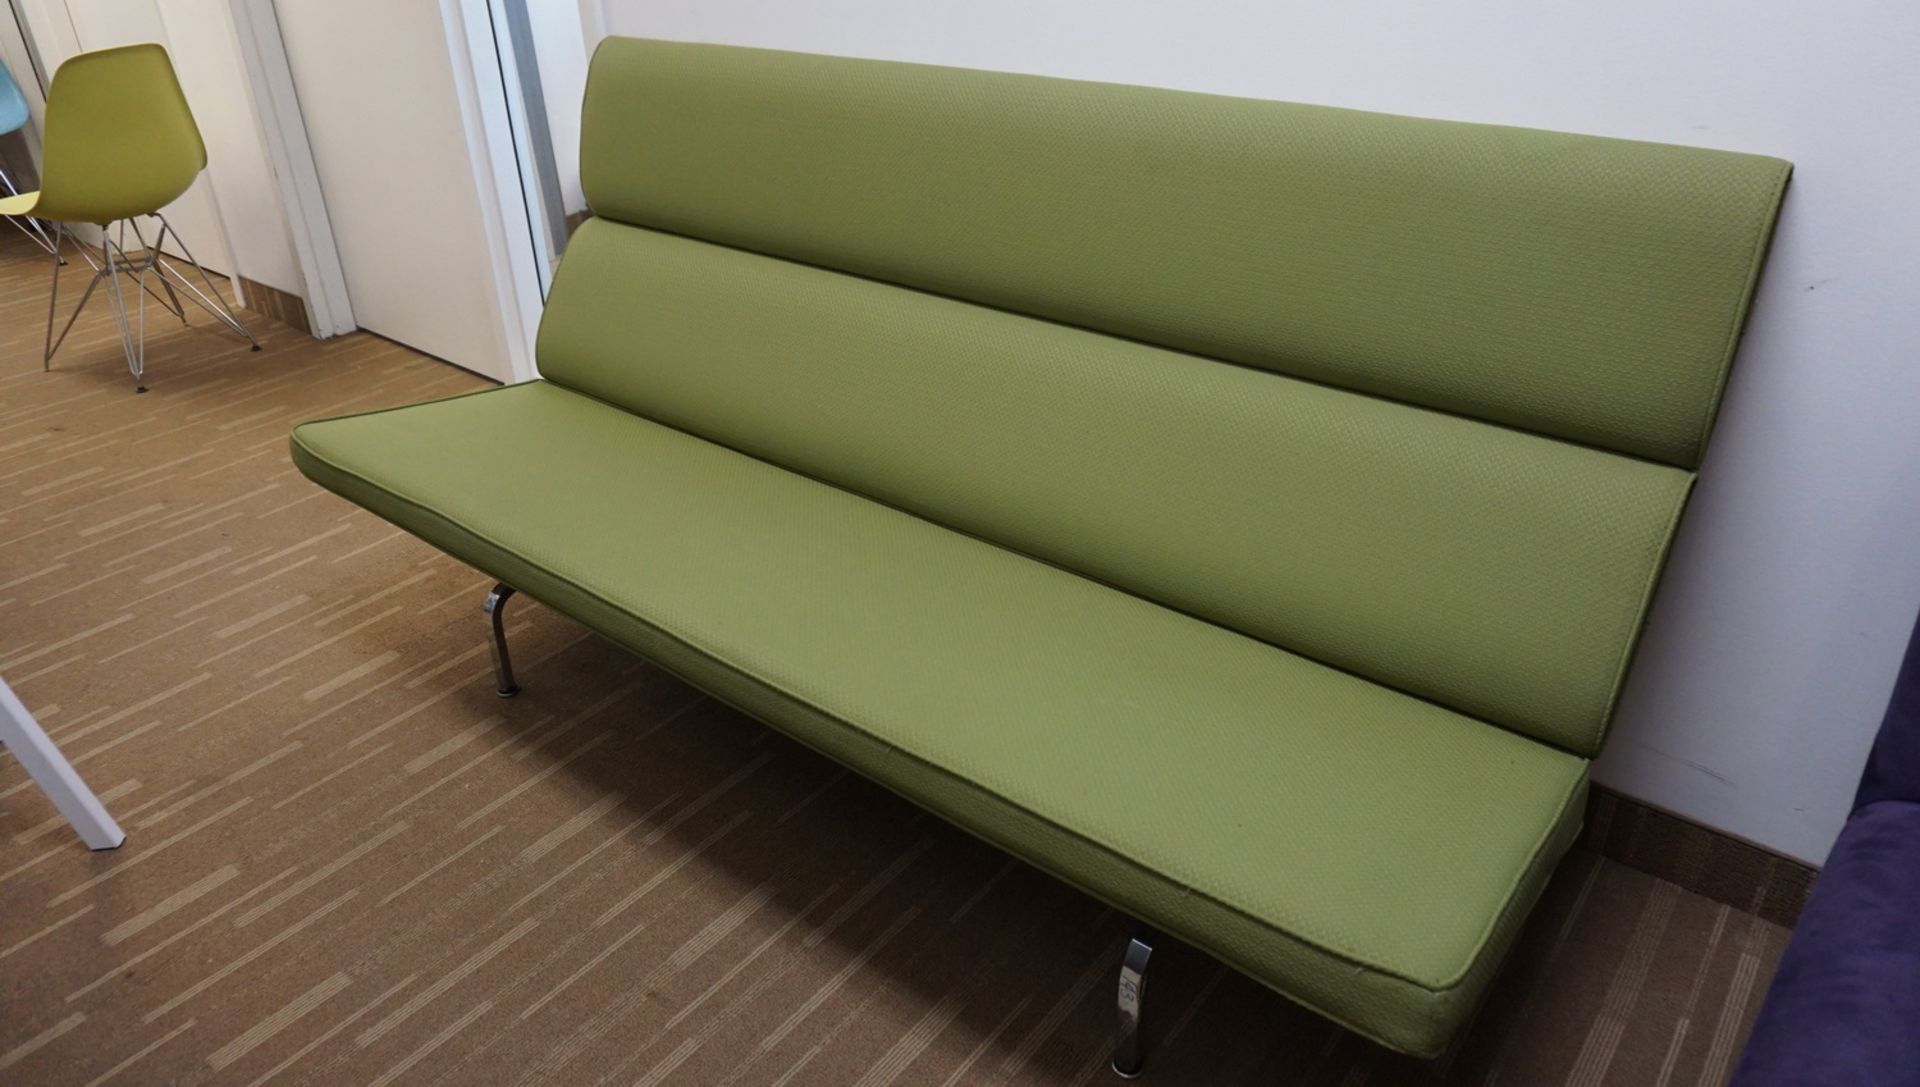 HERMAN MILL EAMES GREEN UPHOLSTERED ARMLESS SOFA ($5,600 MSRP) - Image 3 of 4